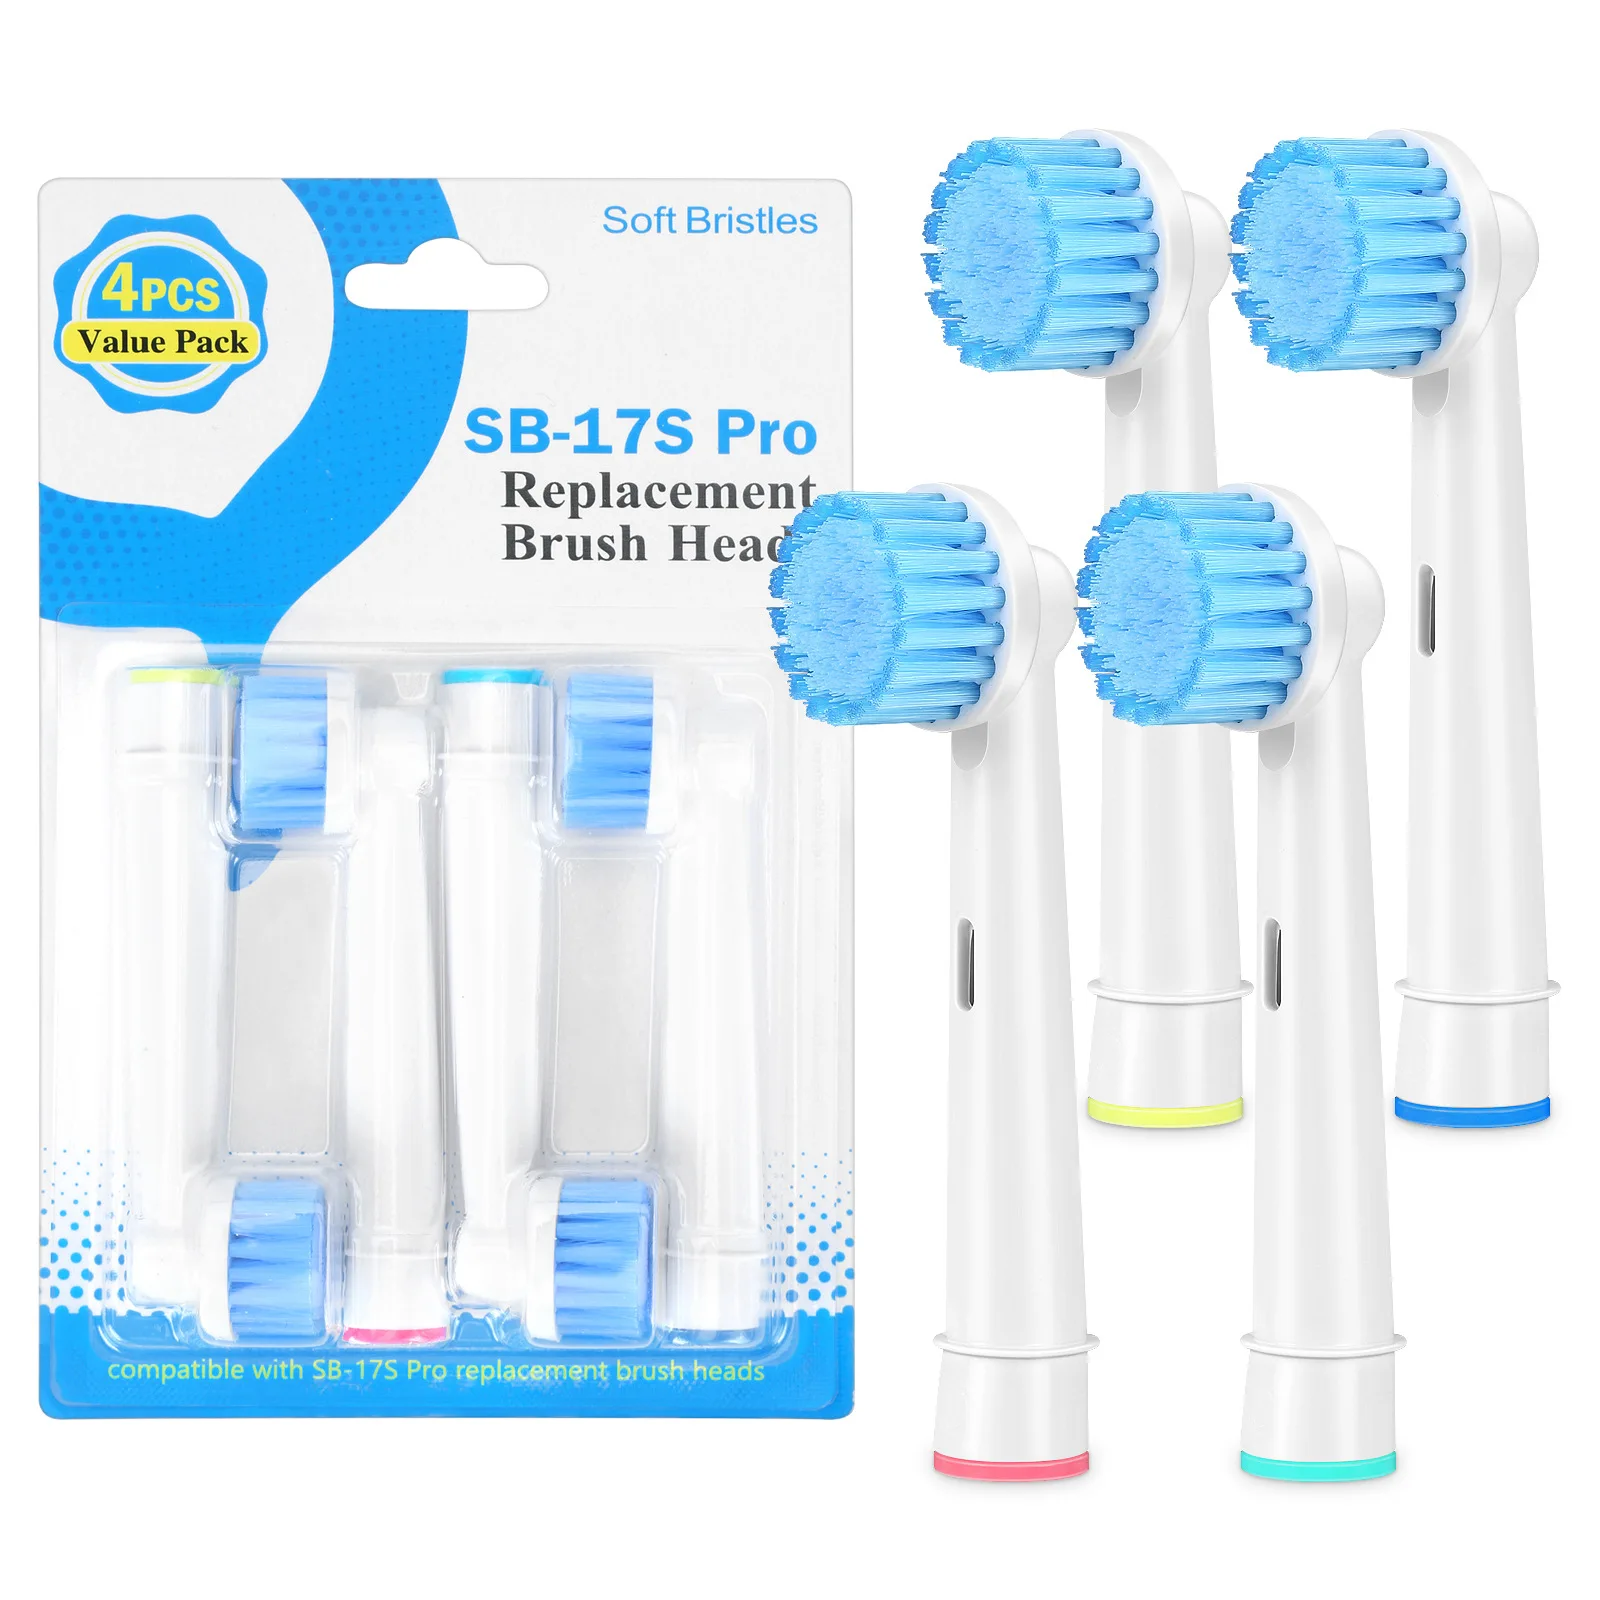 4 Pcs/Pack Replacement Brush Heads For Oral B Electric Toothbrush Head Soft Dupont Bristle Teeth Cleaning & Whitening Brush Head original oral b replacement brush heads for oral b rotating electric toothbrush genuine teeth whitening soft bristle refills